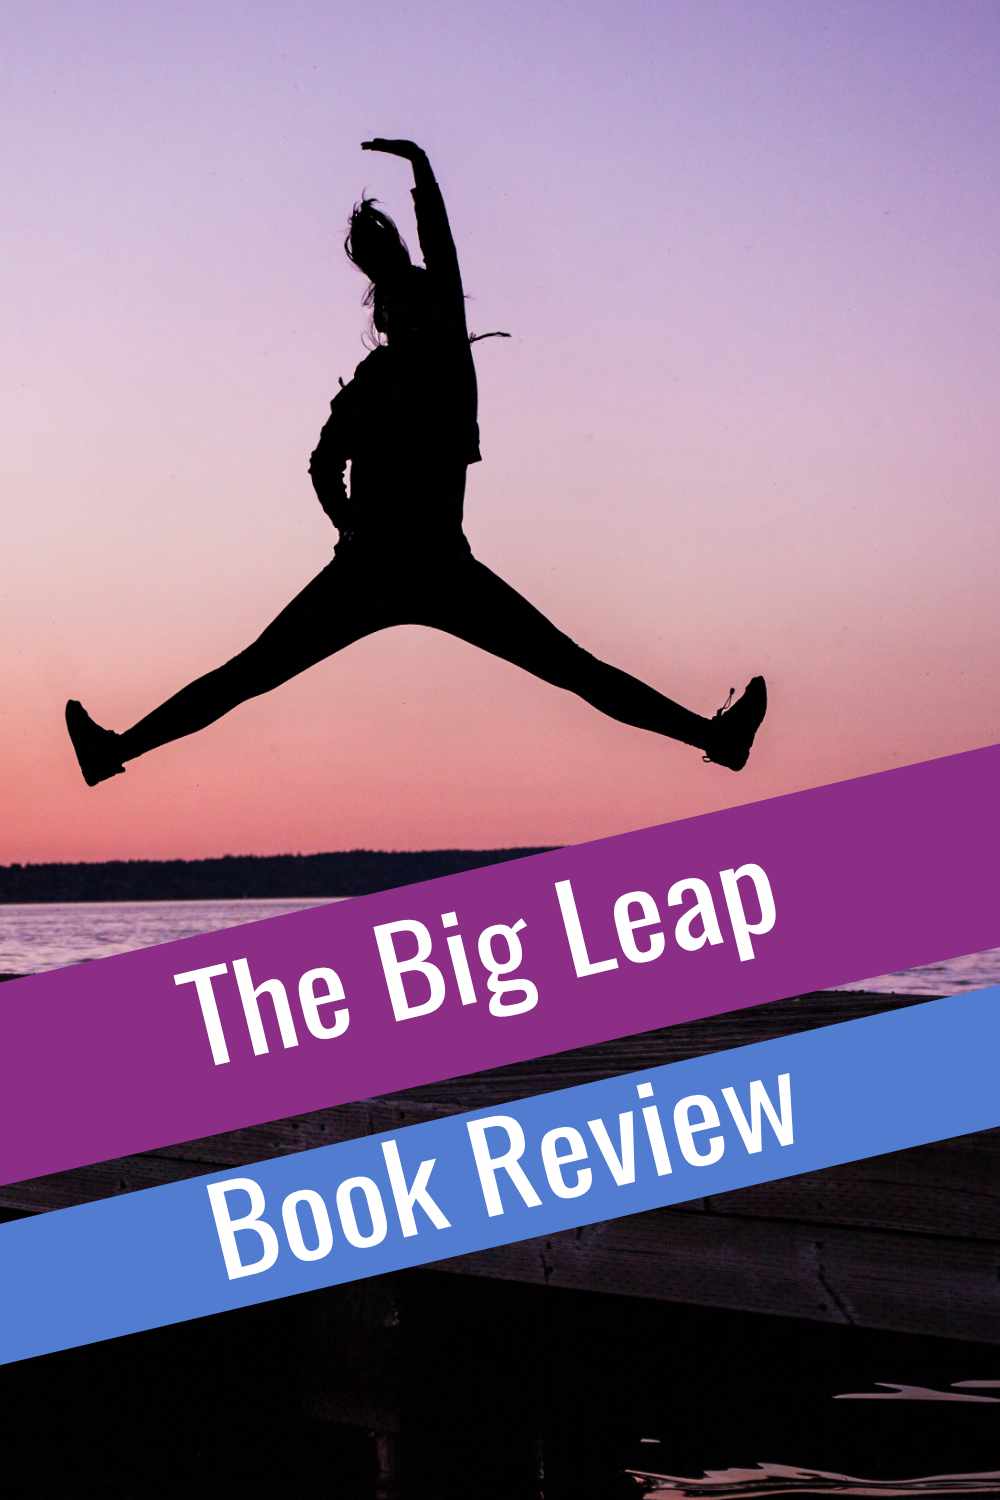 social media image that says The Big Leap Book Review